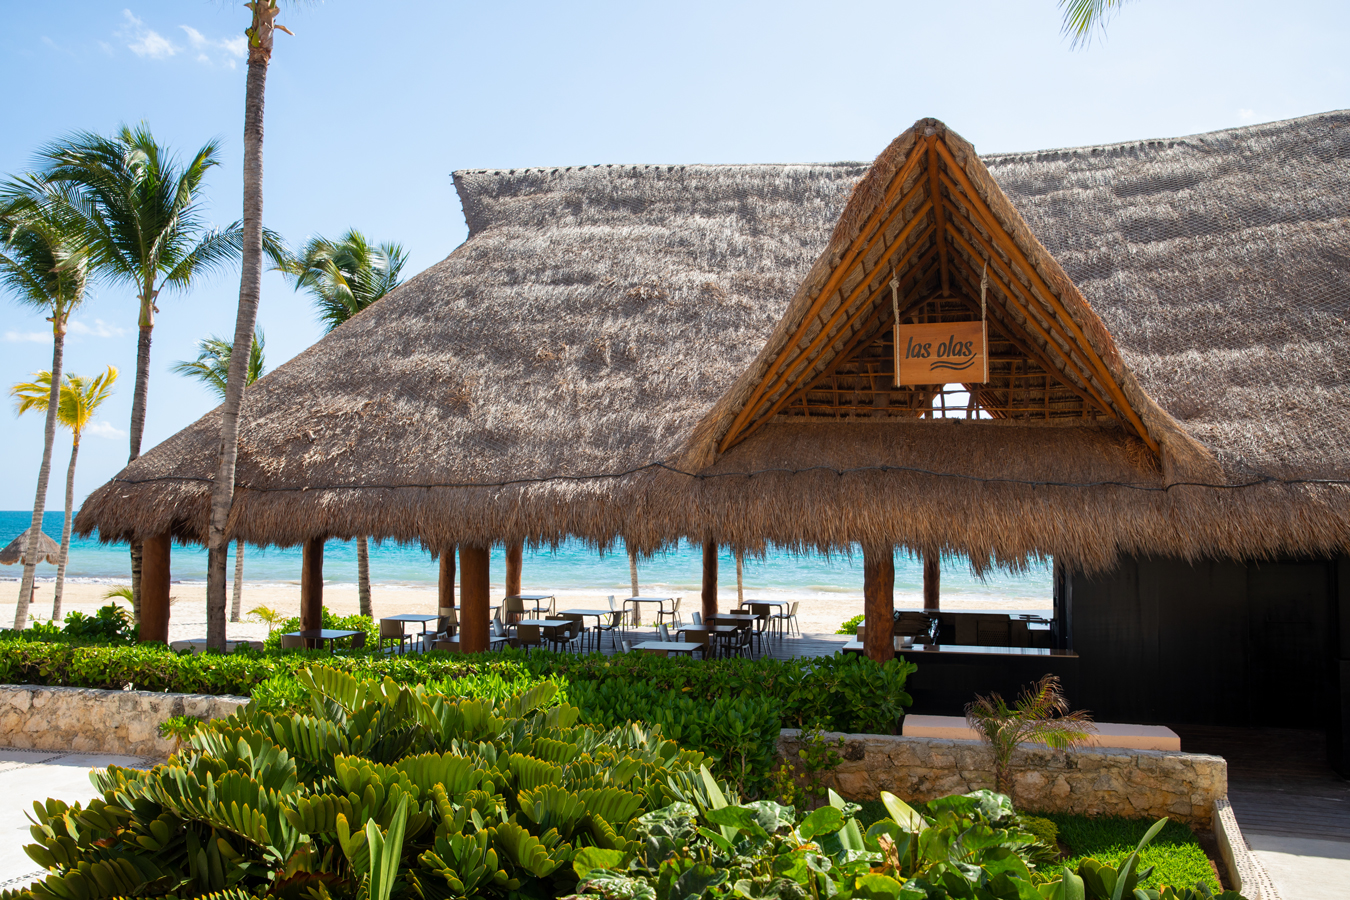 Enjoy delicious beachfront lunches in Las Olas Restaurant at Excellence Riviera Cancun